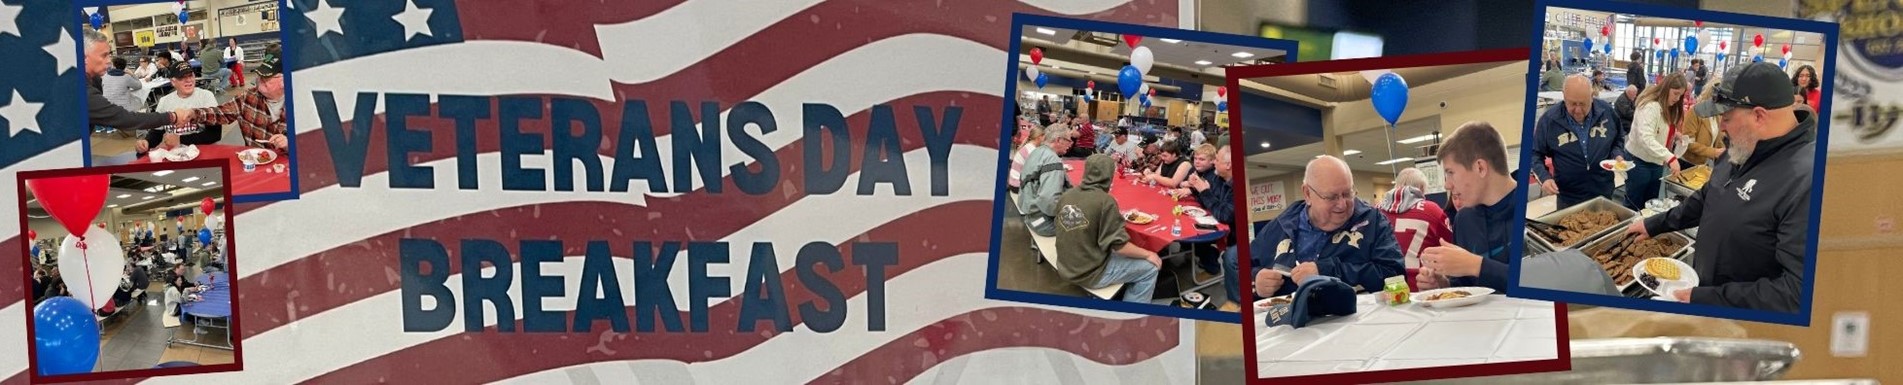 BHS Student Council hosts Veterans for breakfast